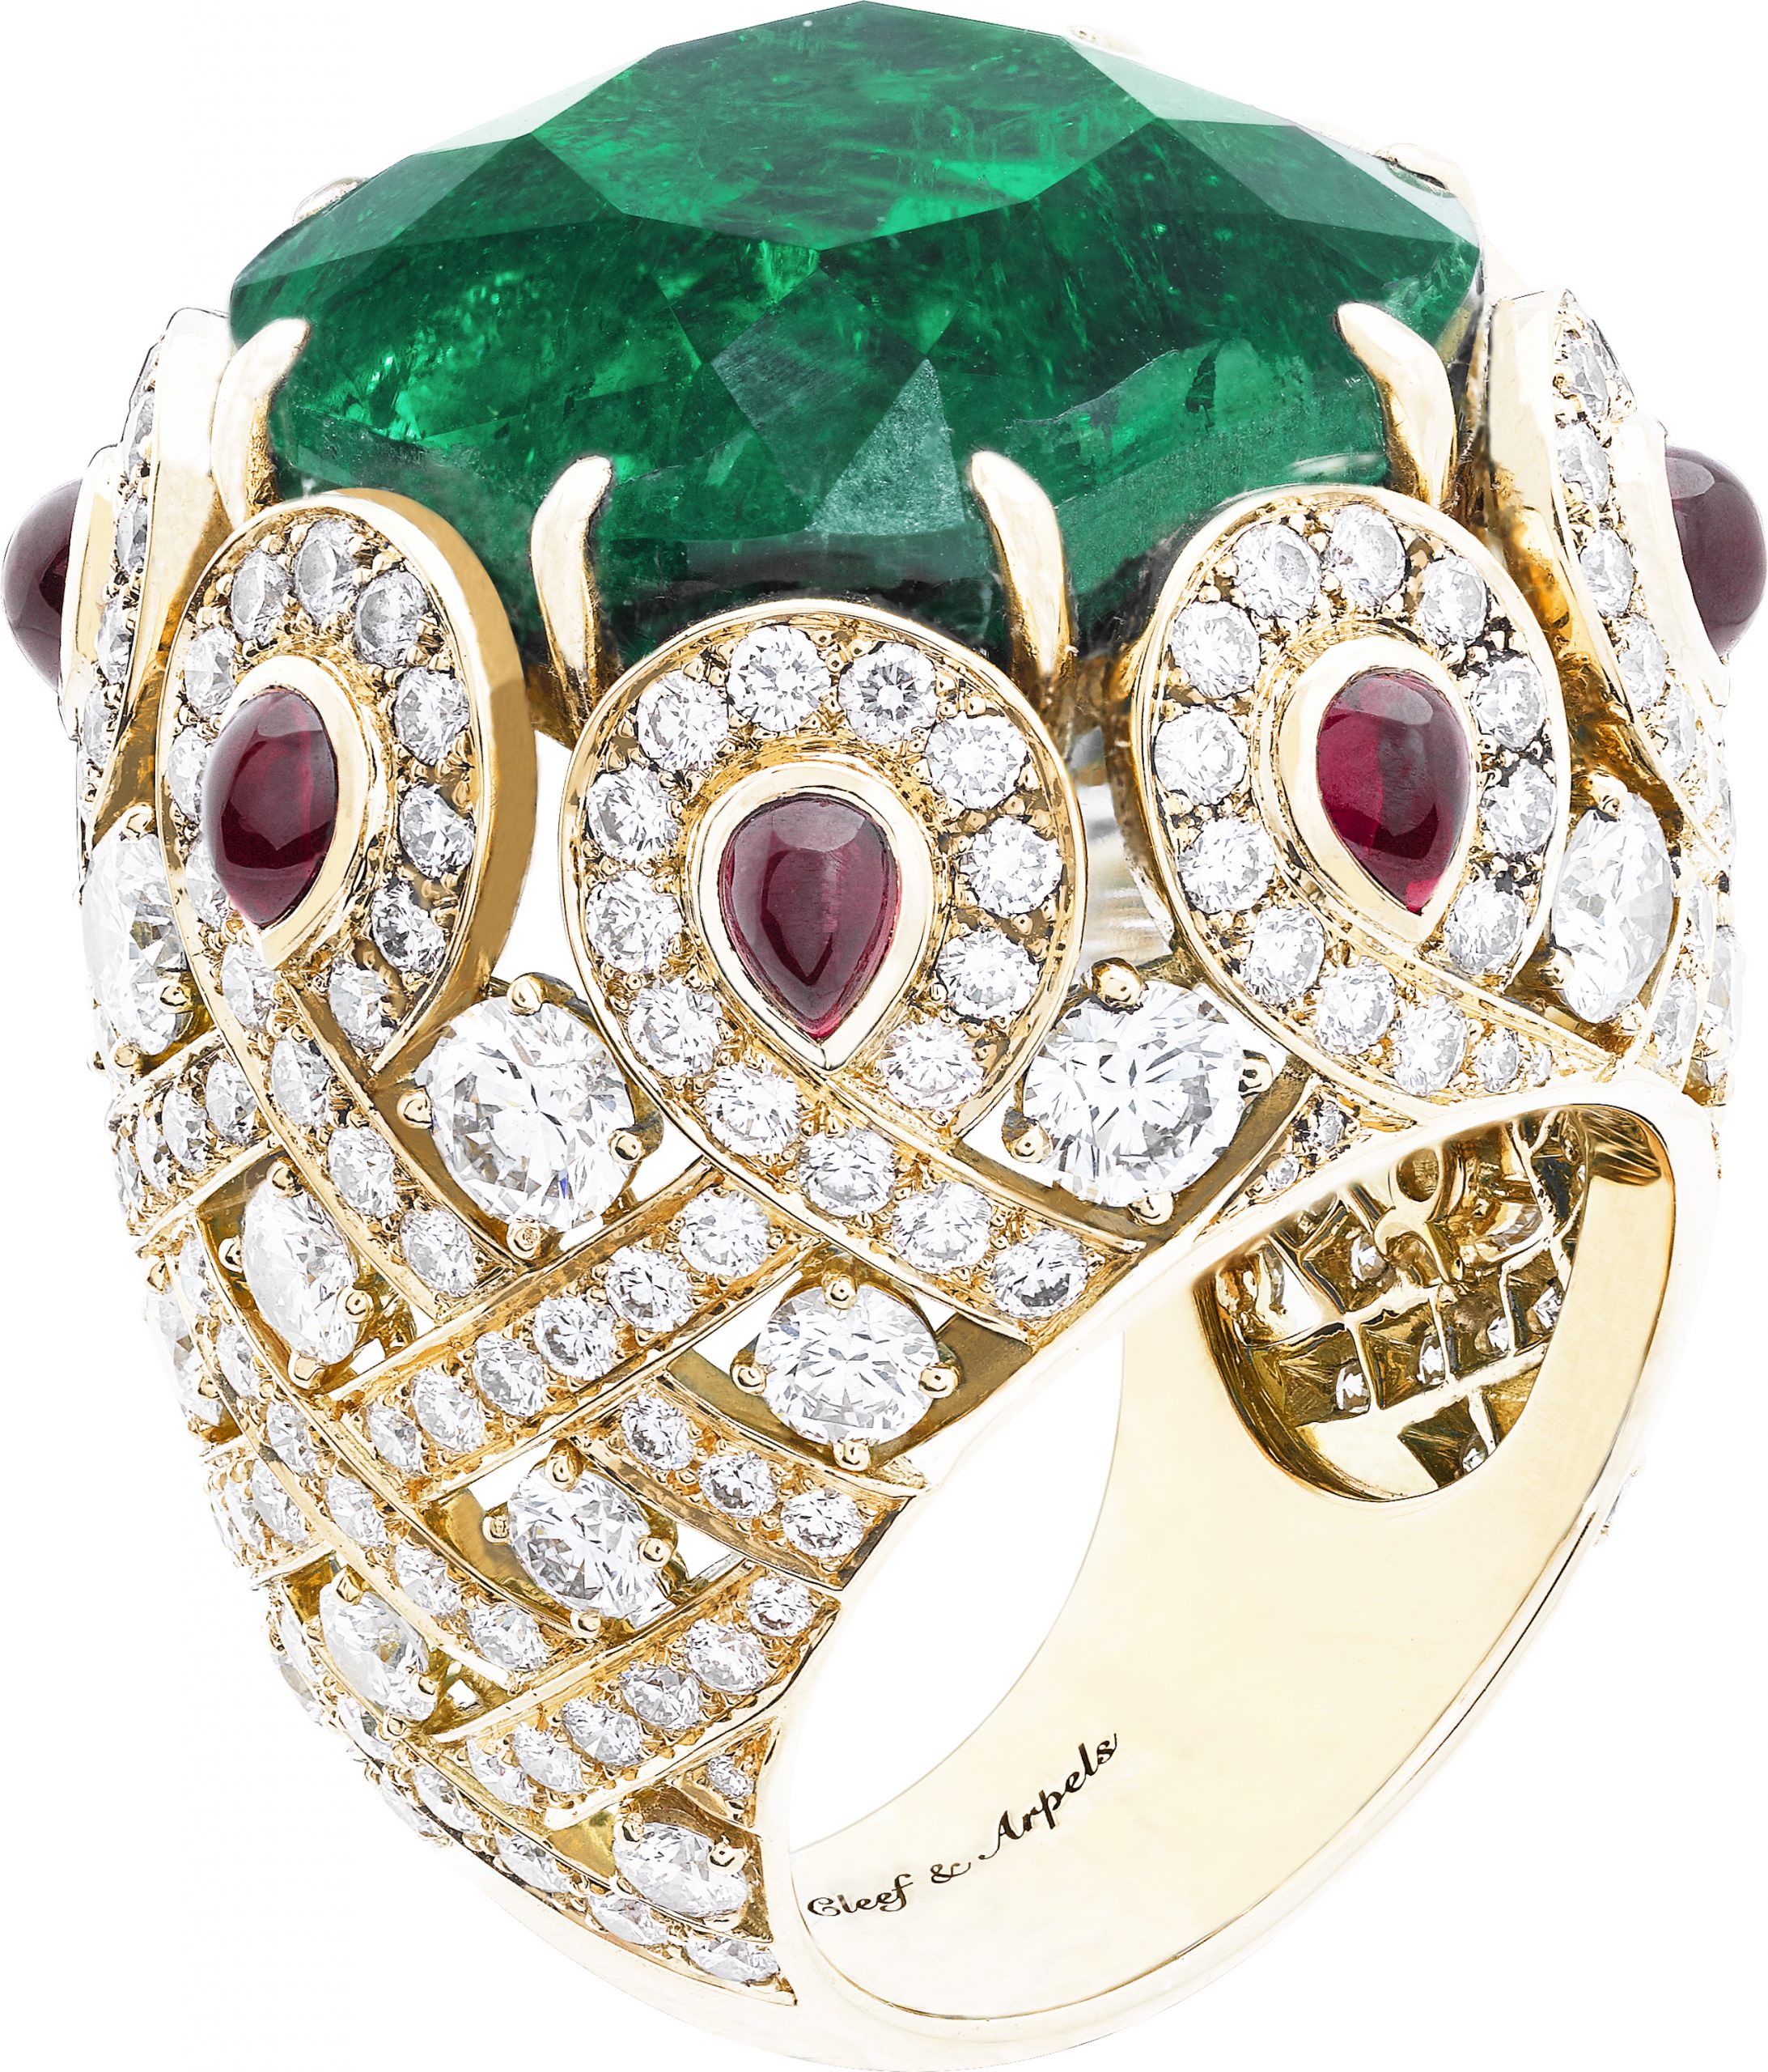 Tales of High Jewellery, Stories